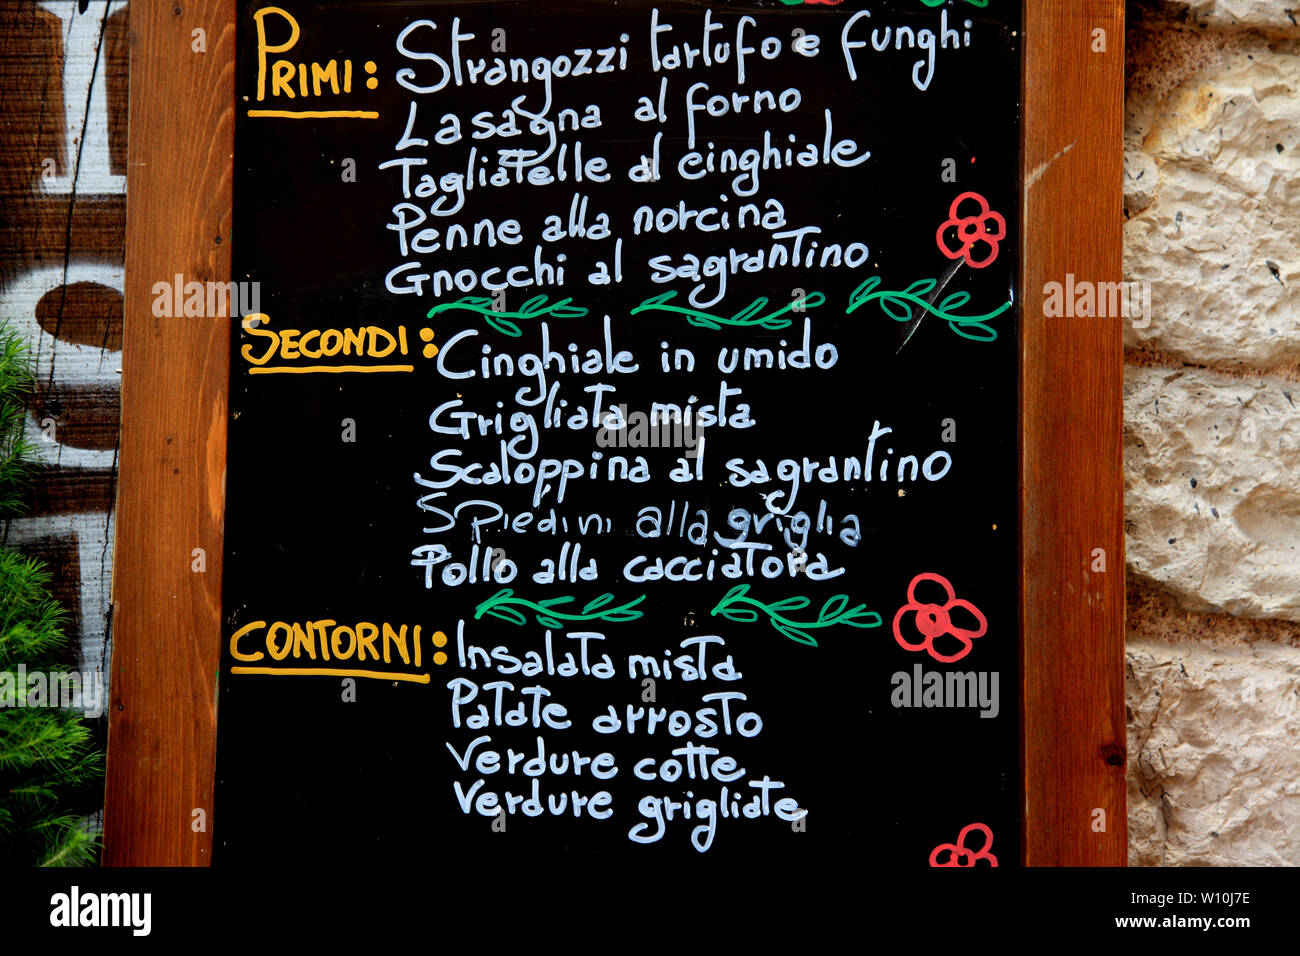 Menu outside a restaurant in Umbria Italy Stock Photo